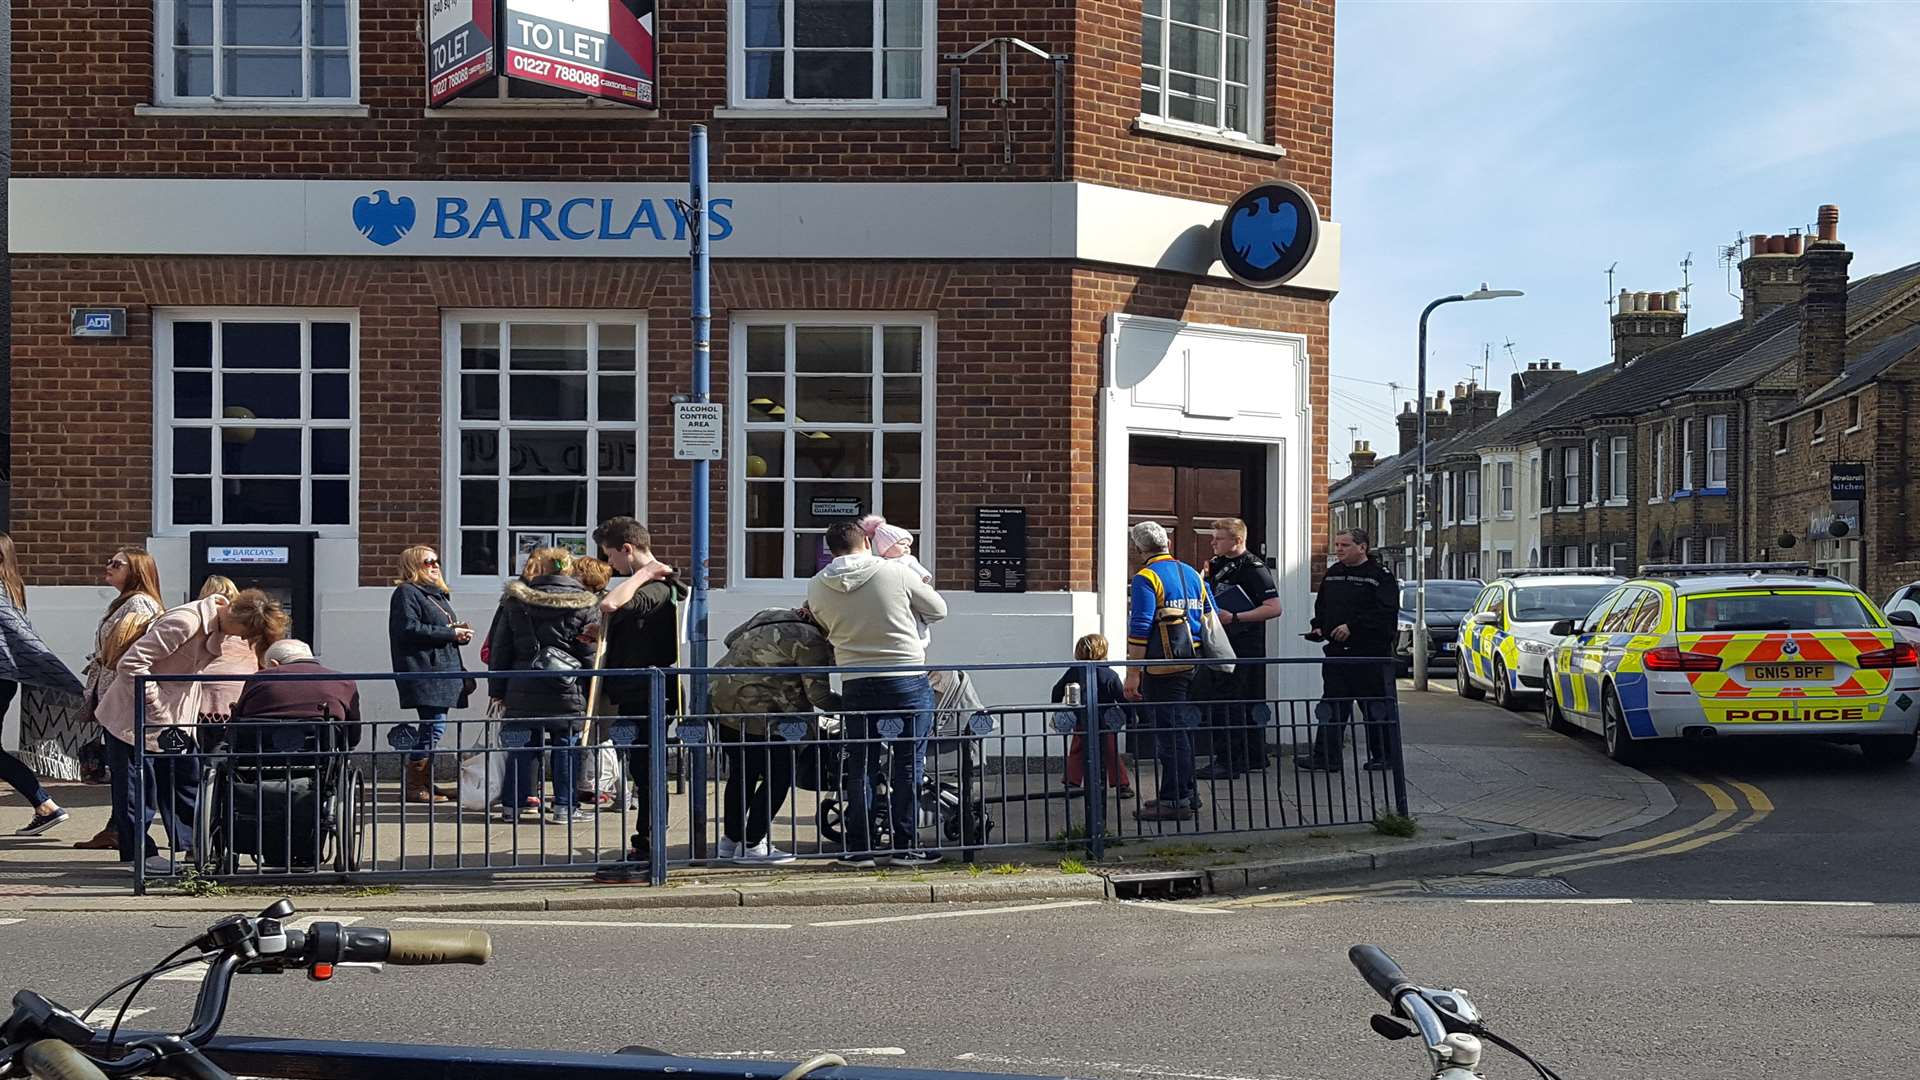 Police at the scene of the bank robbery at Barclays in Whitstable